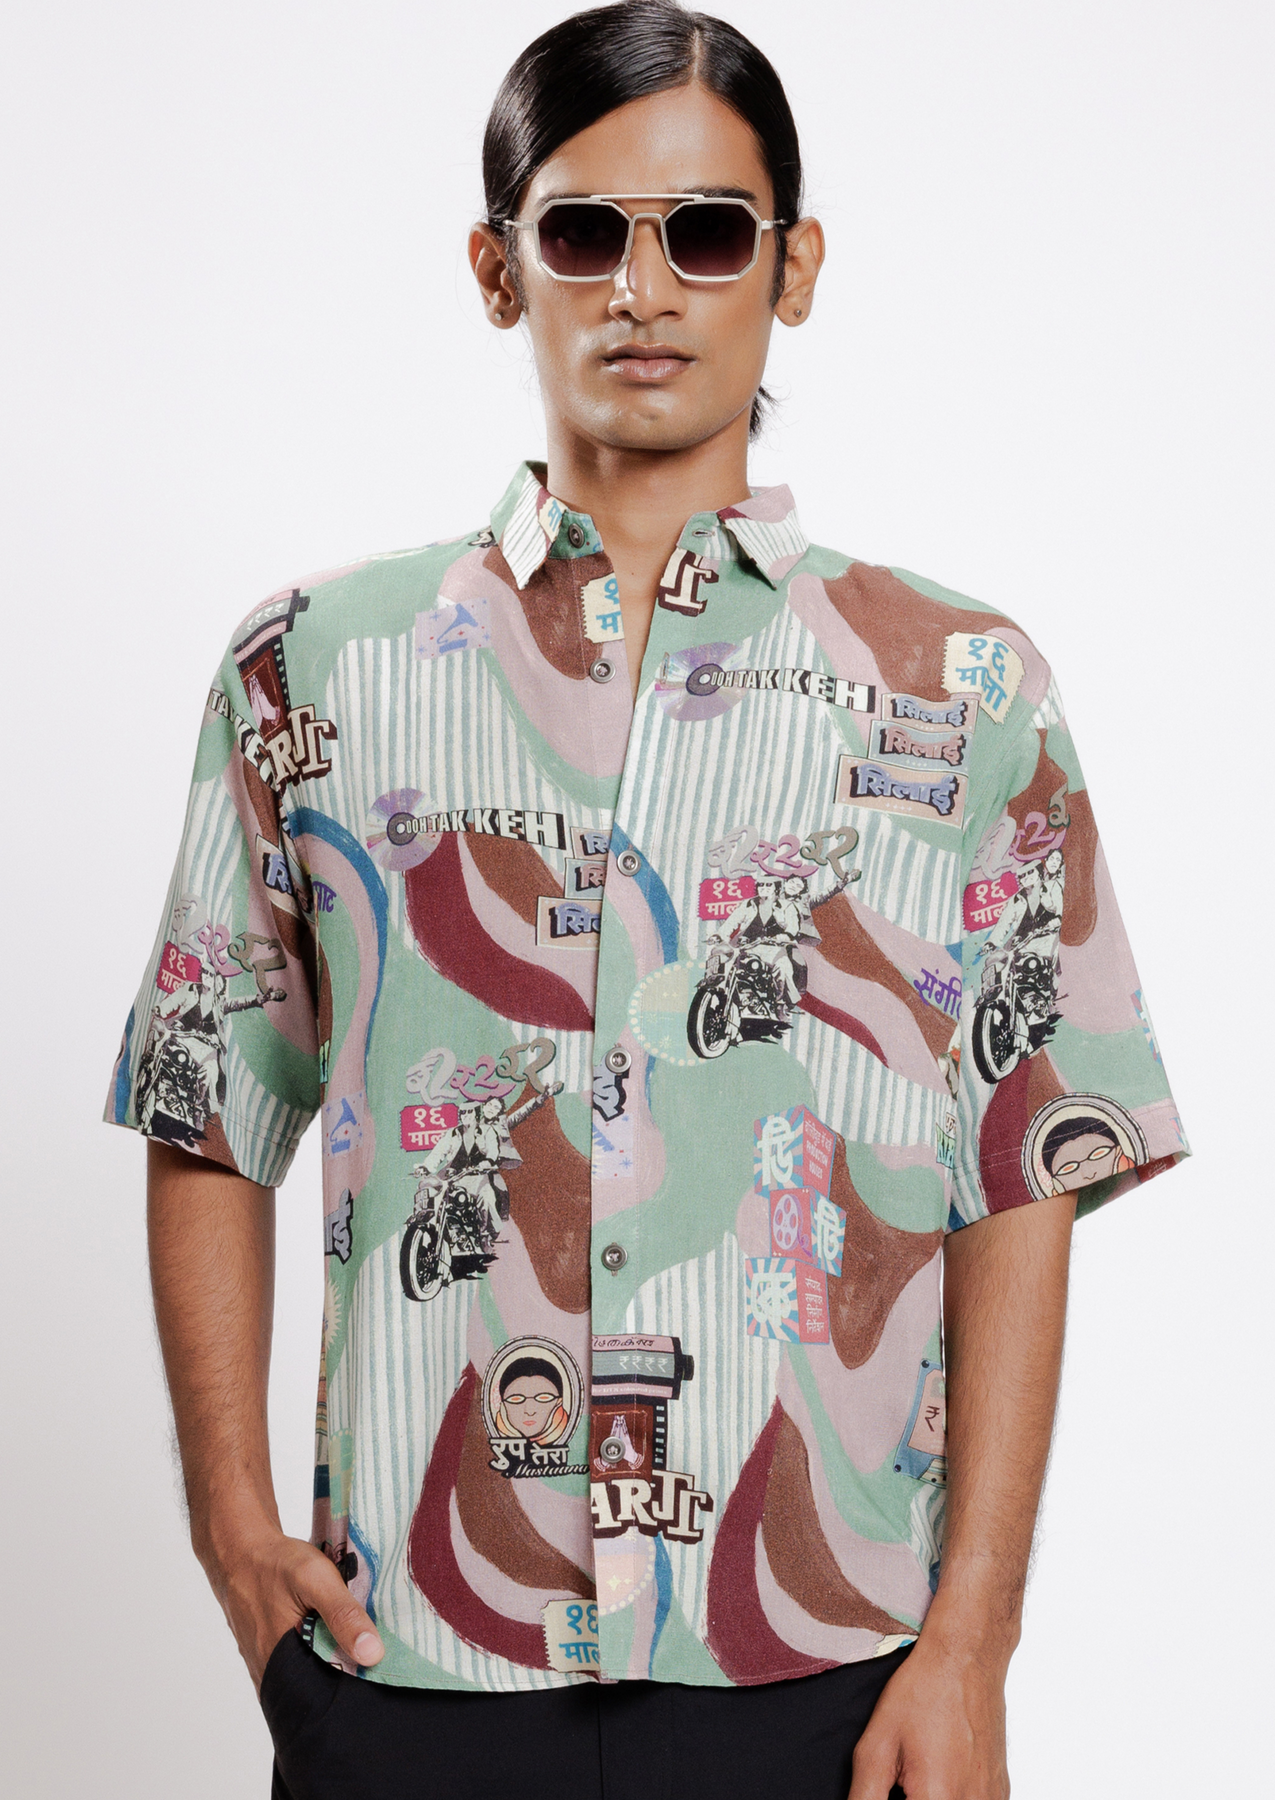 FILMY HALF SHIRT, a product by Doh tak keh